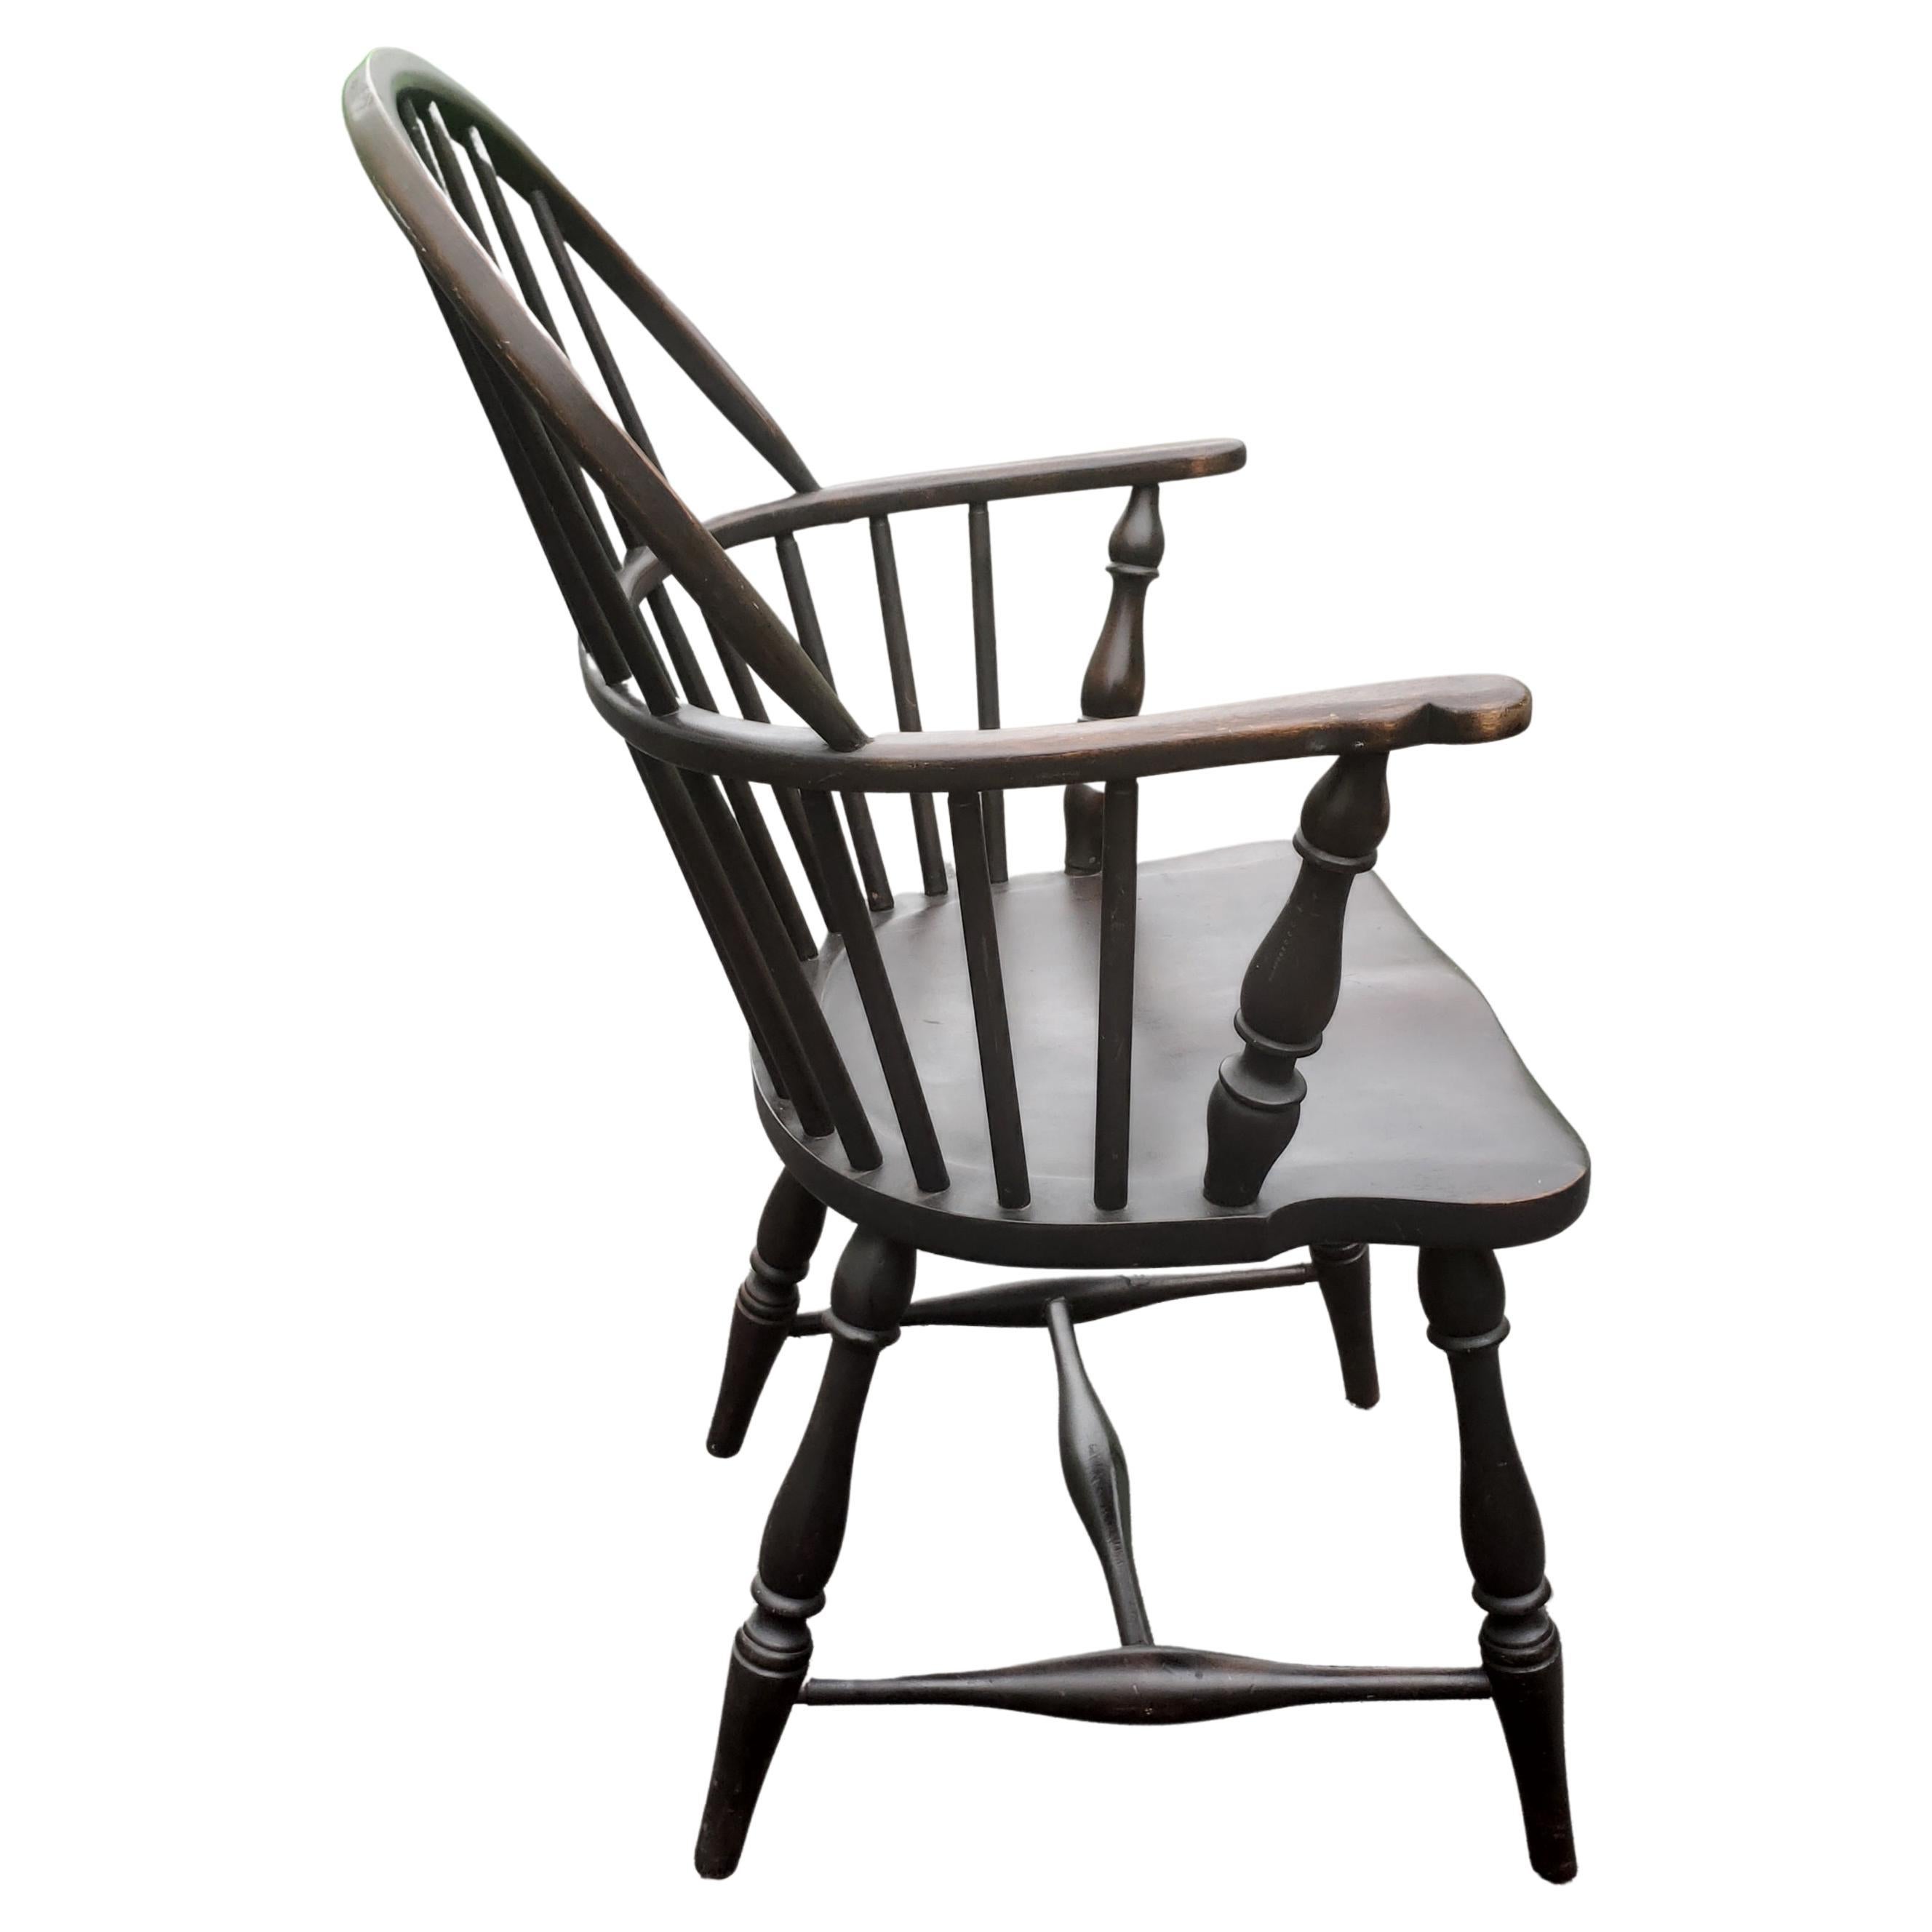 American Colonial Late 18th C. Sack-Back New England Ebonized Windsor Chair